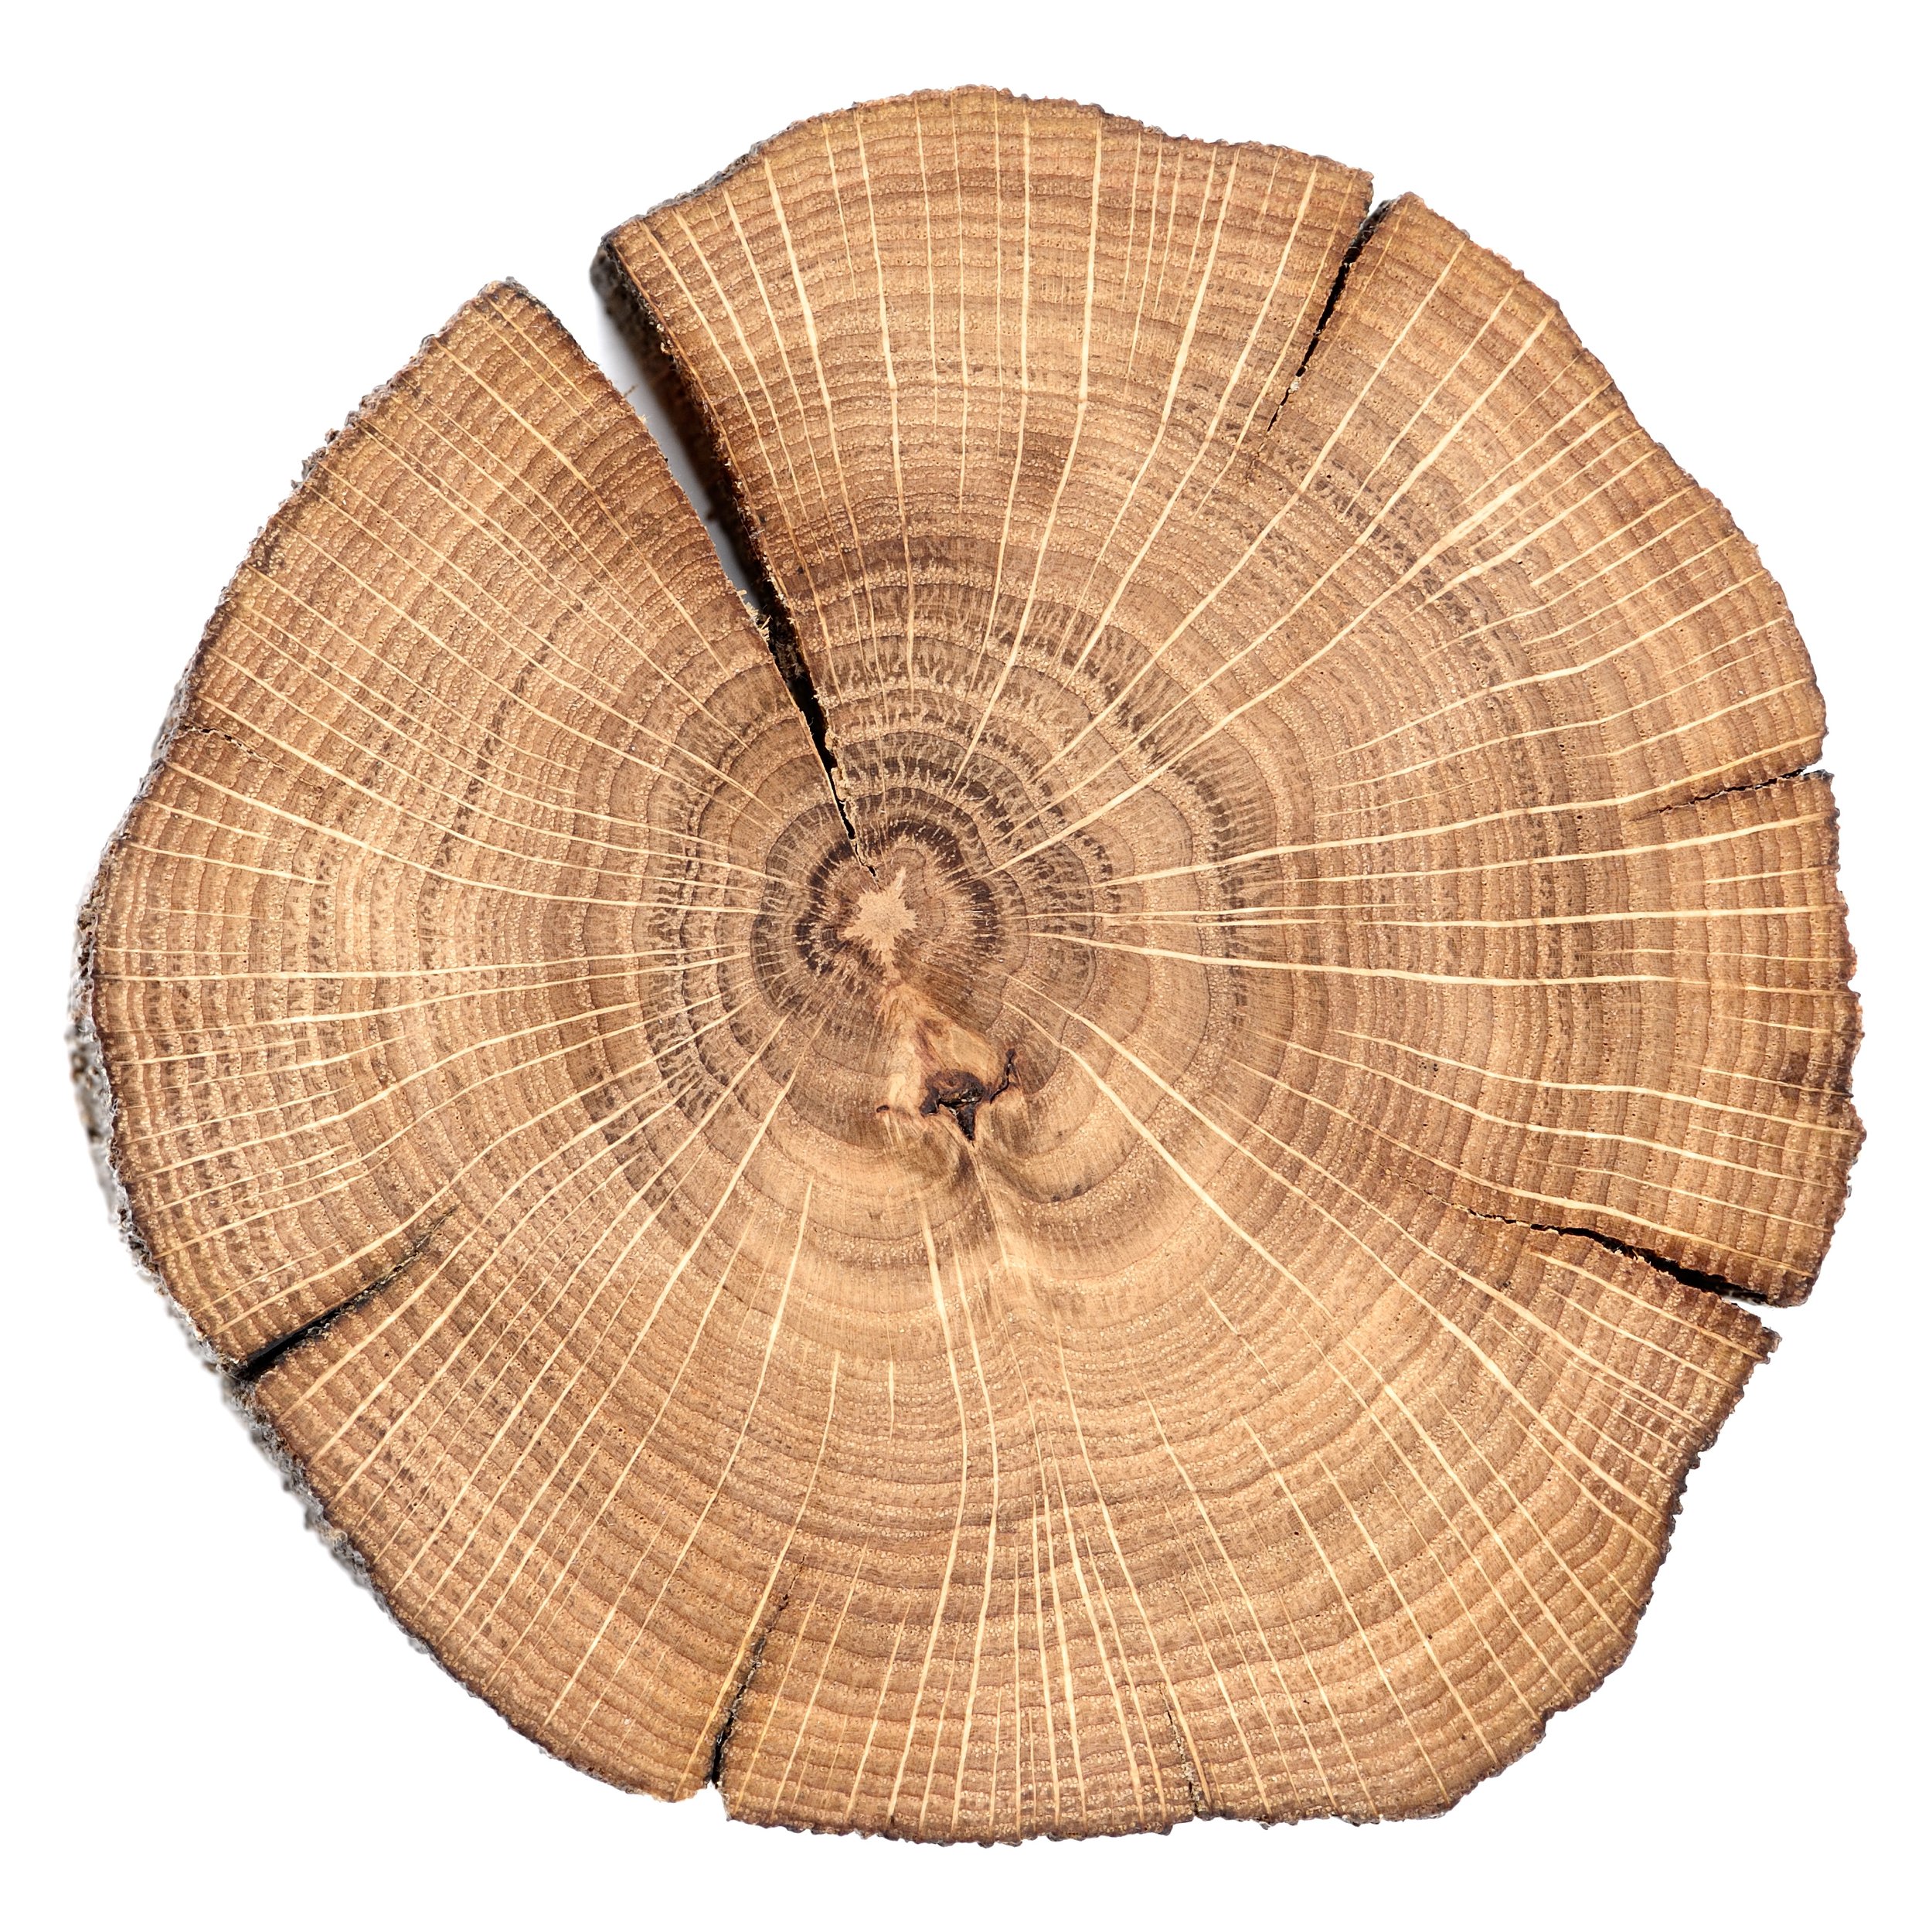 Oak-cracked-split-with-growth-rings-isolated-502013540_2748x2748.jpeg